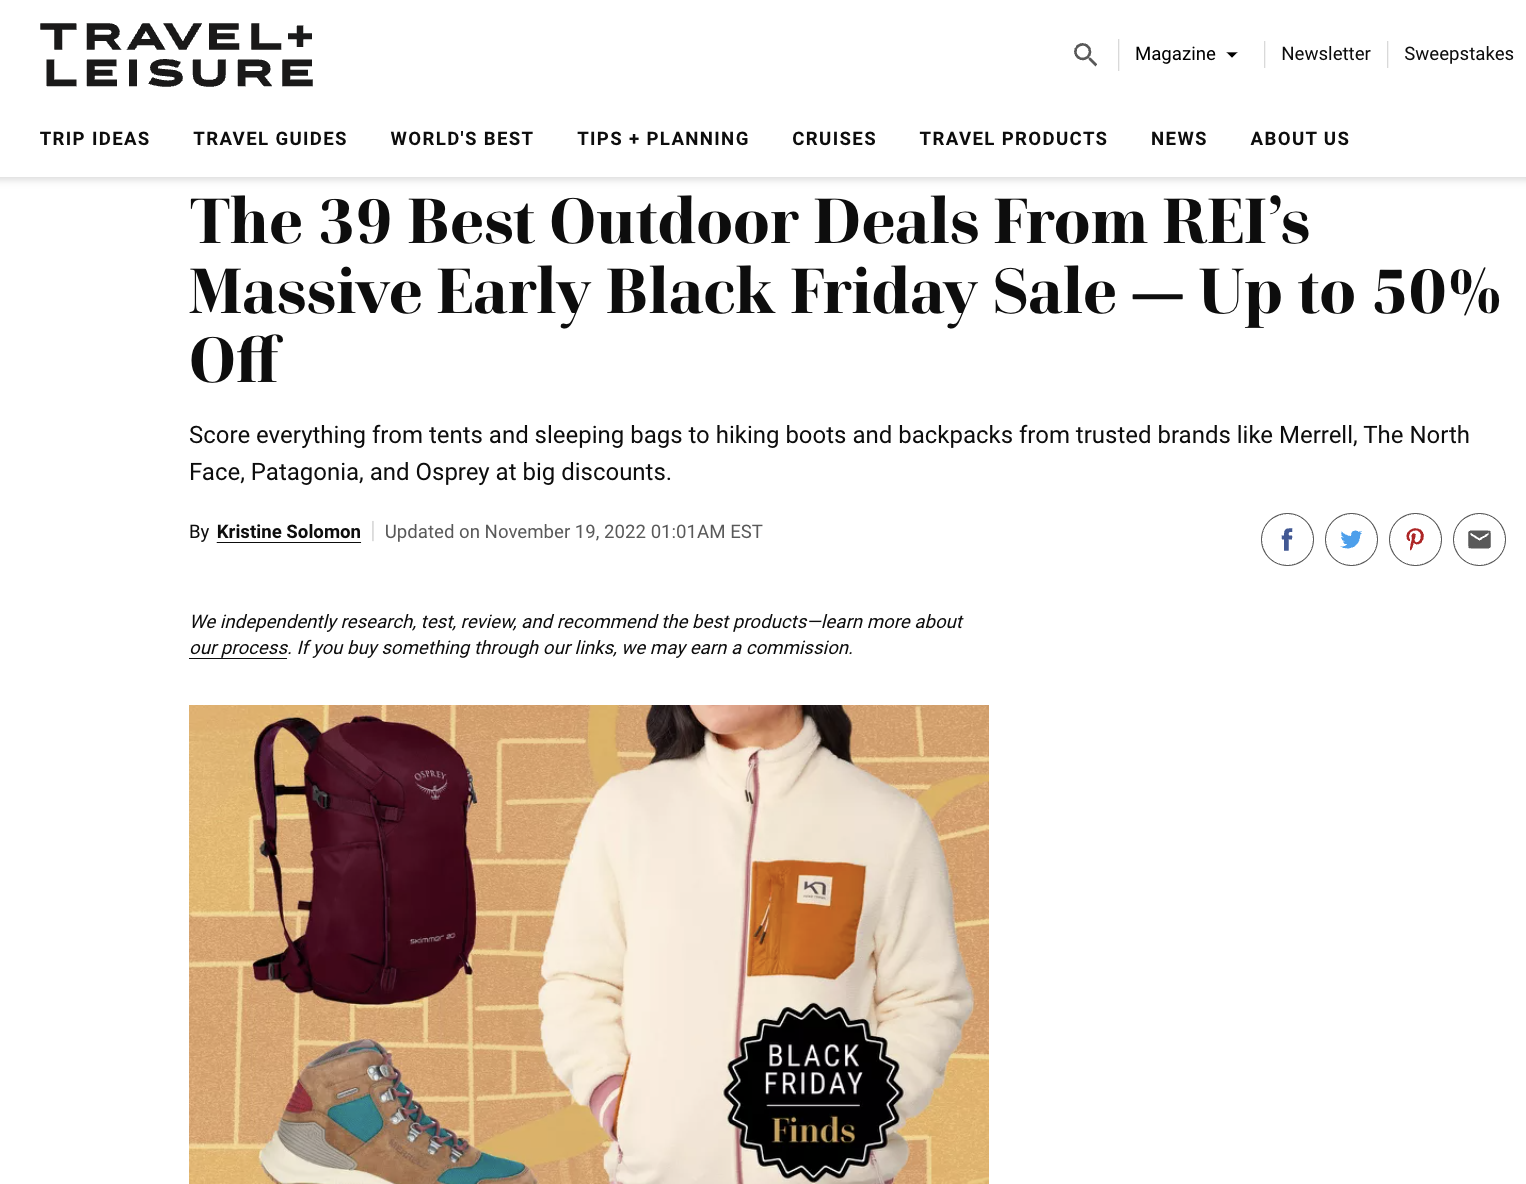 The 39 Best Outdoor Deals From REI’s Massive Early Black Friday Sale — Up to 50% Off